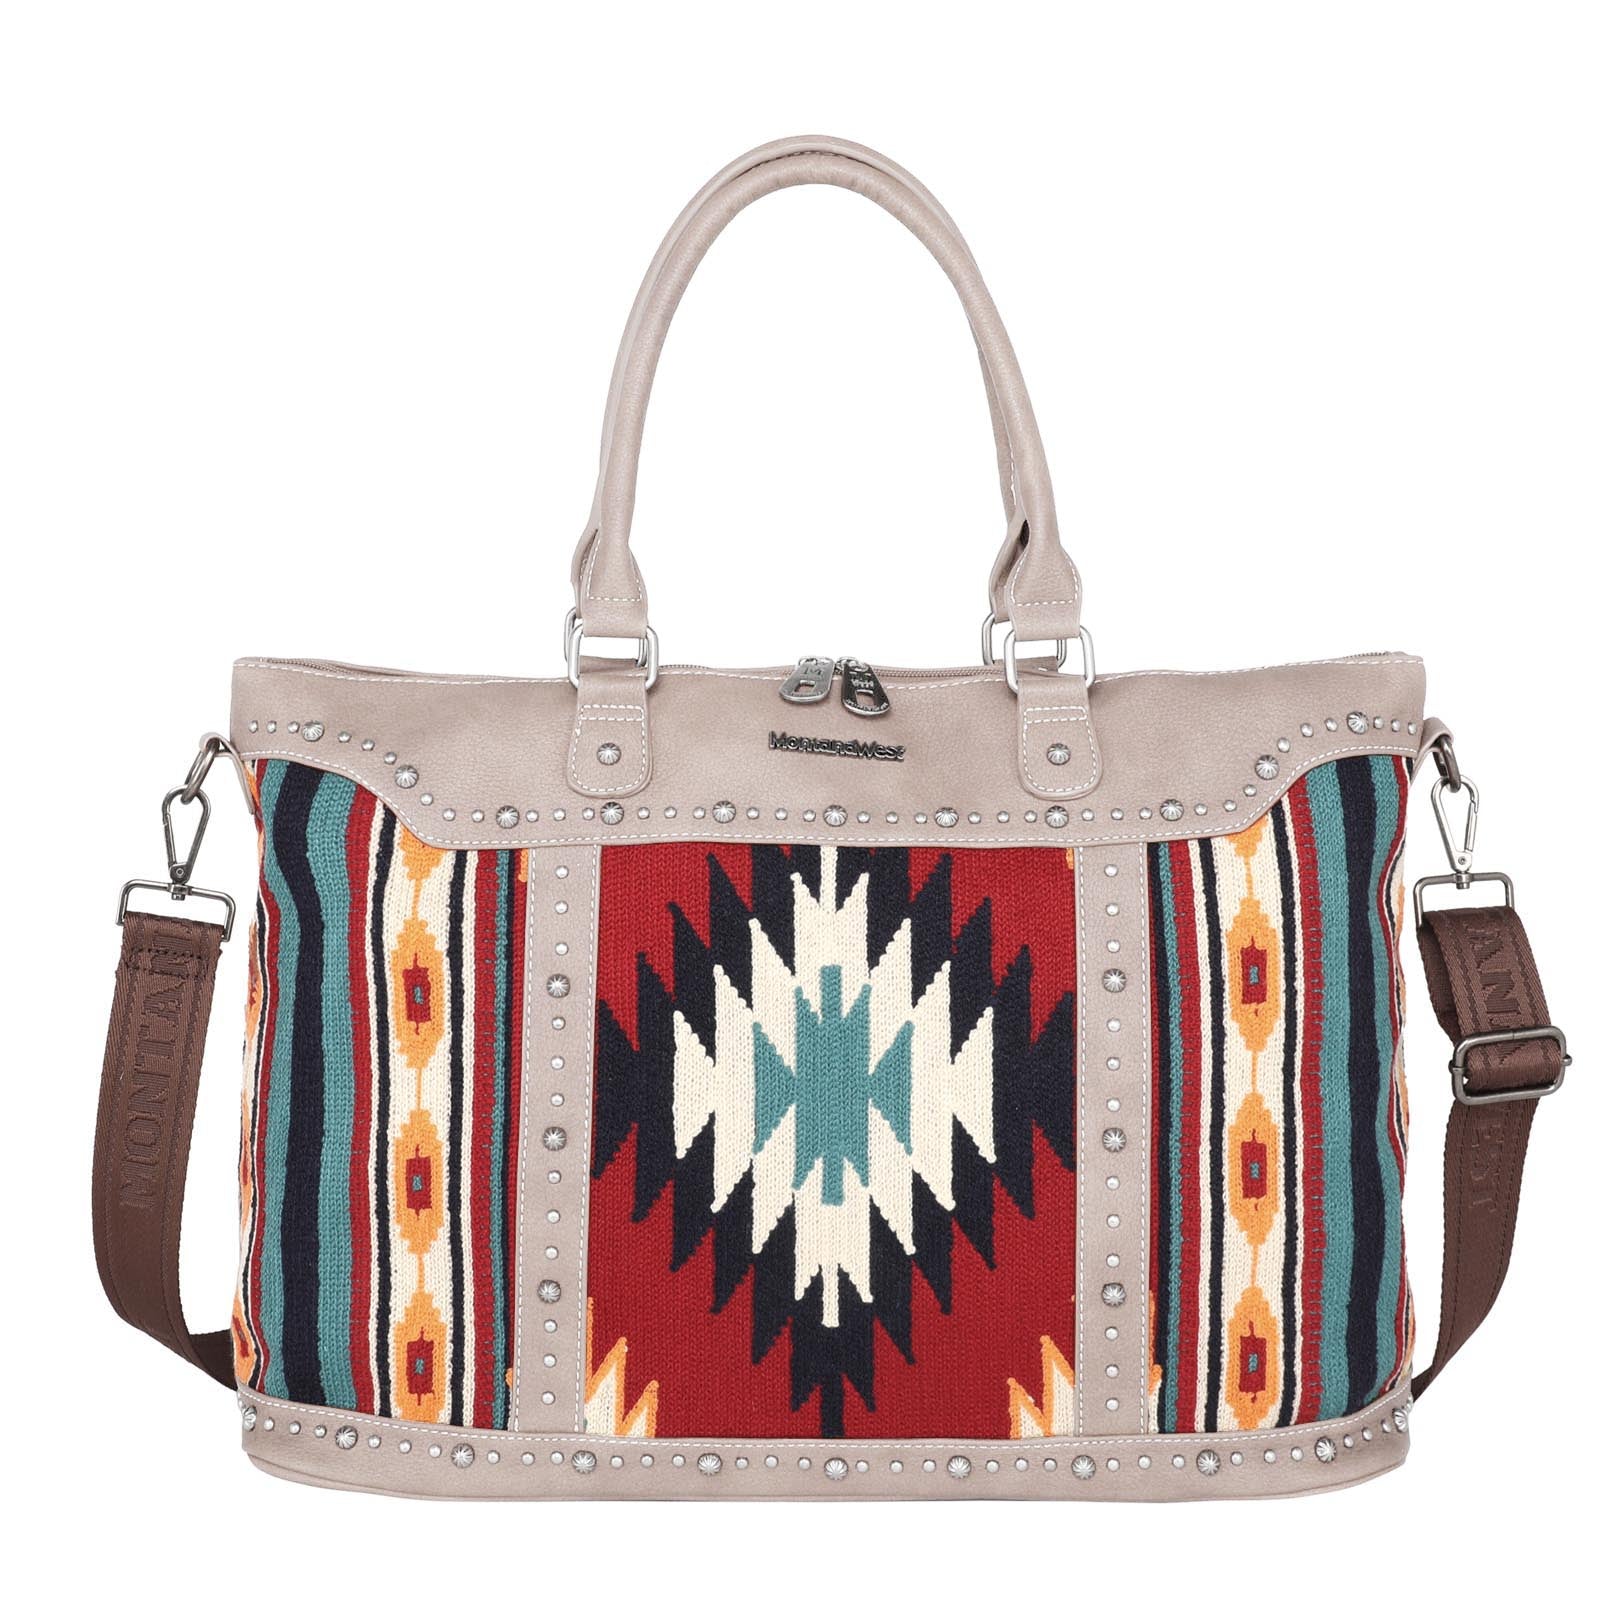 Montana West Aztec Tapestry Collection Weekender Bag - Montana West World